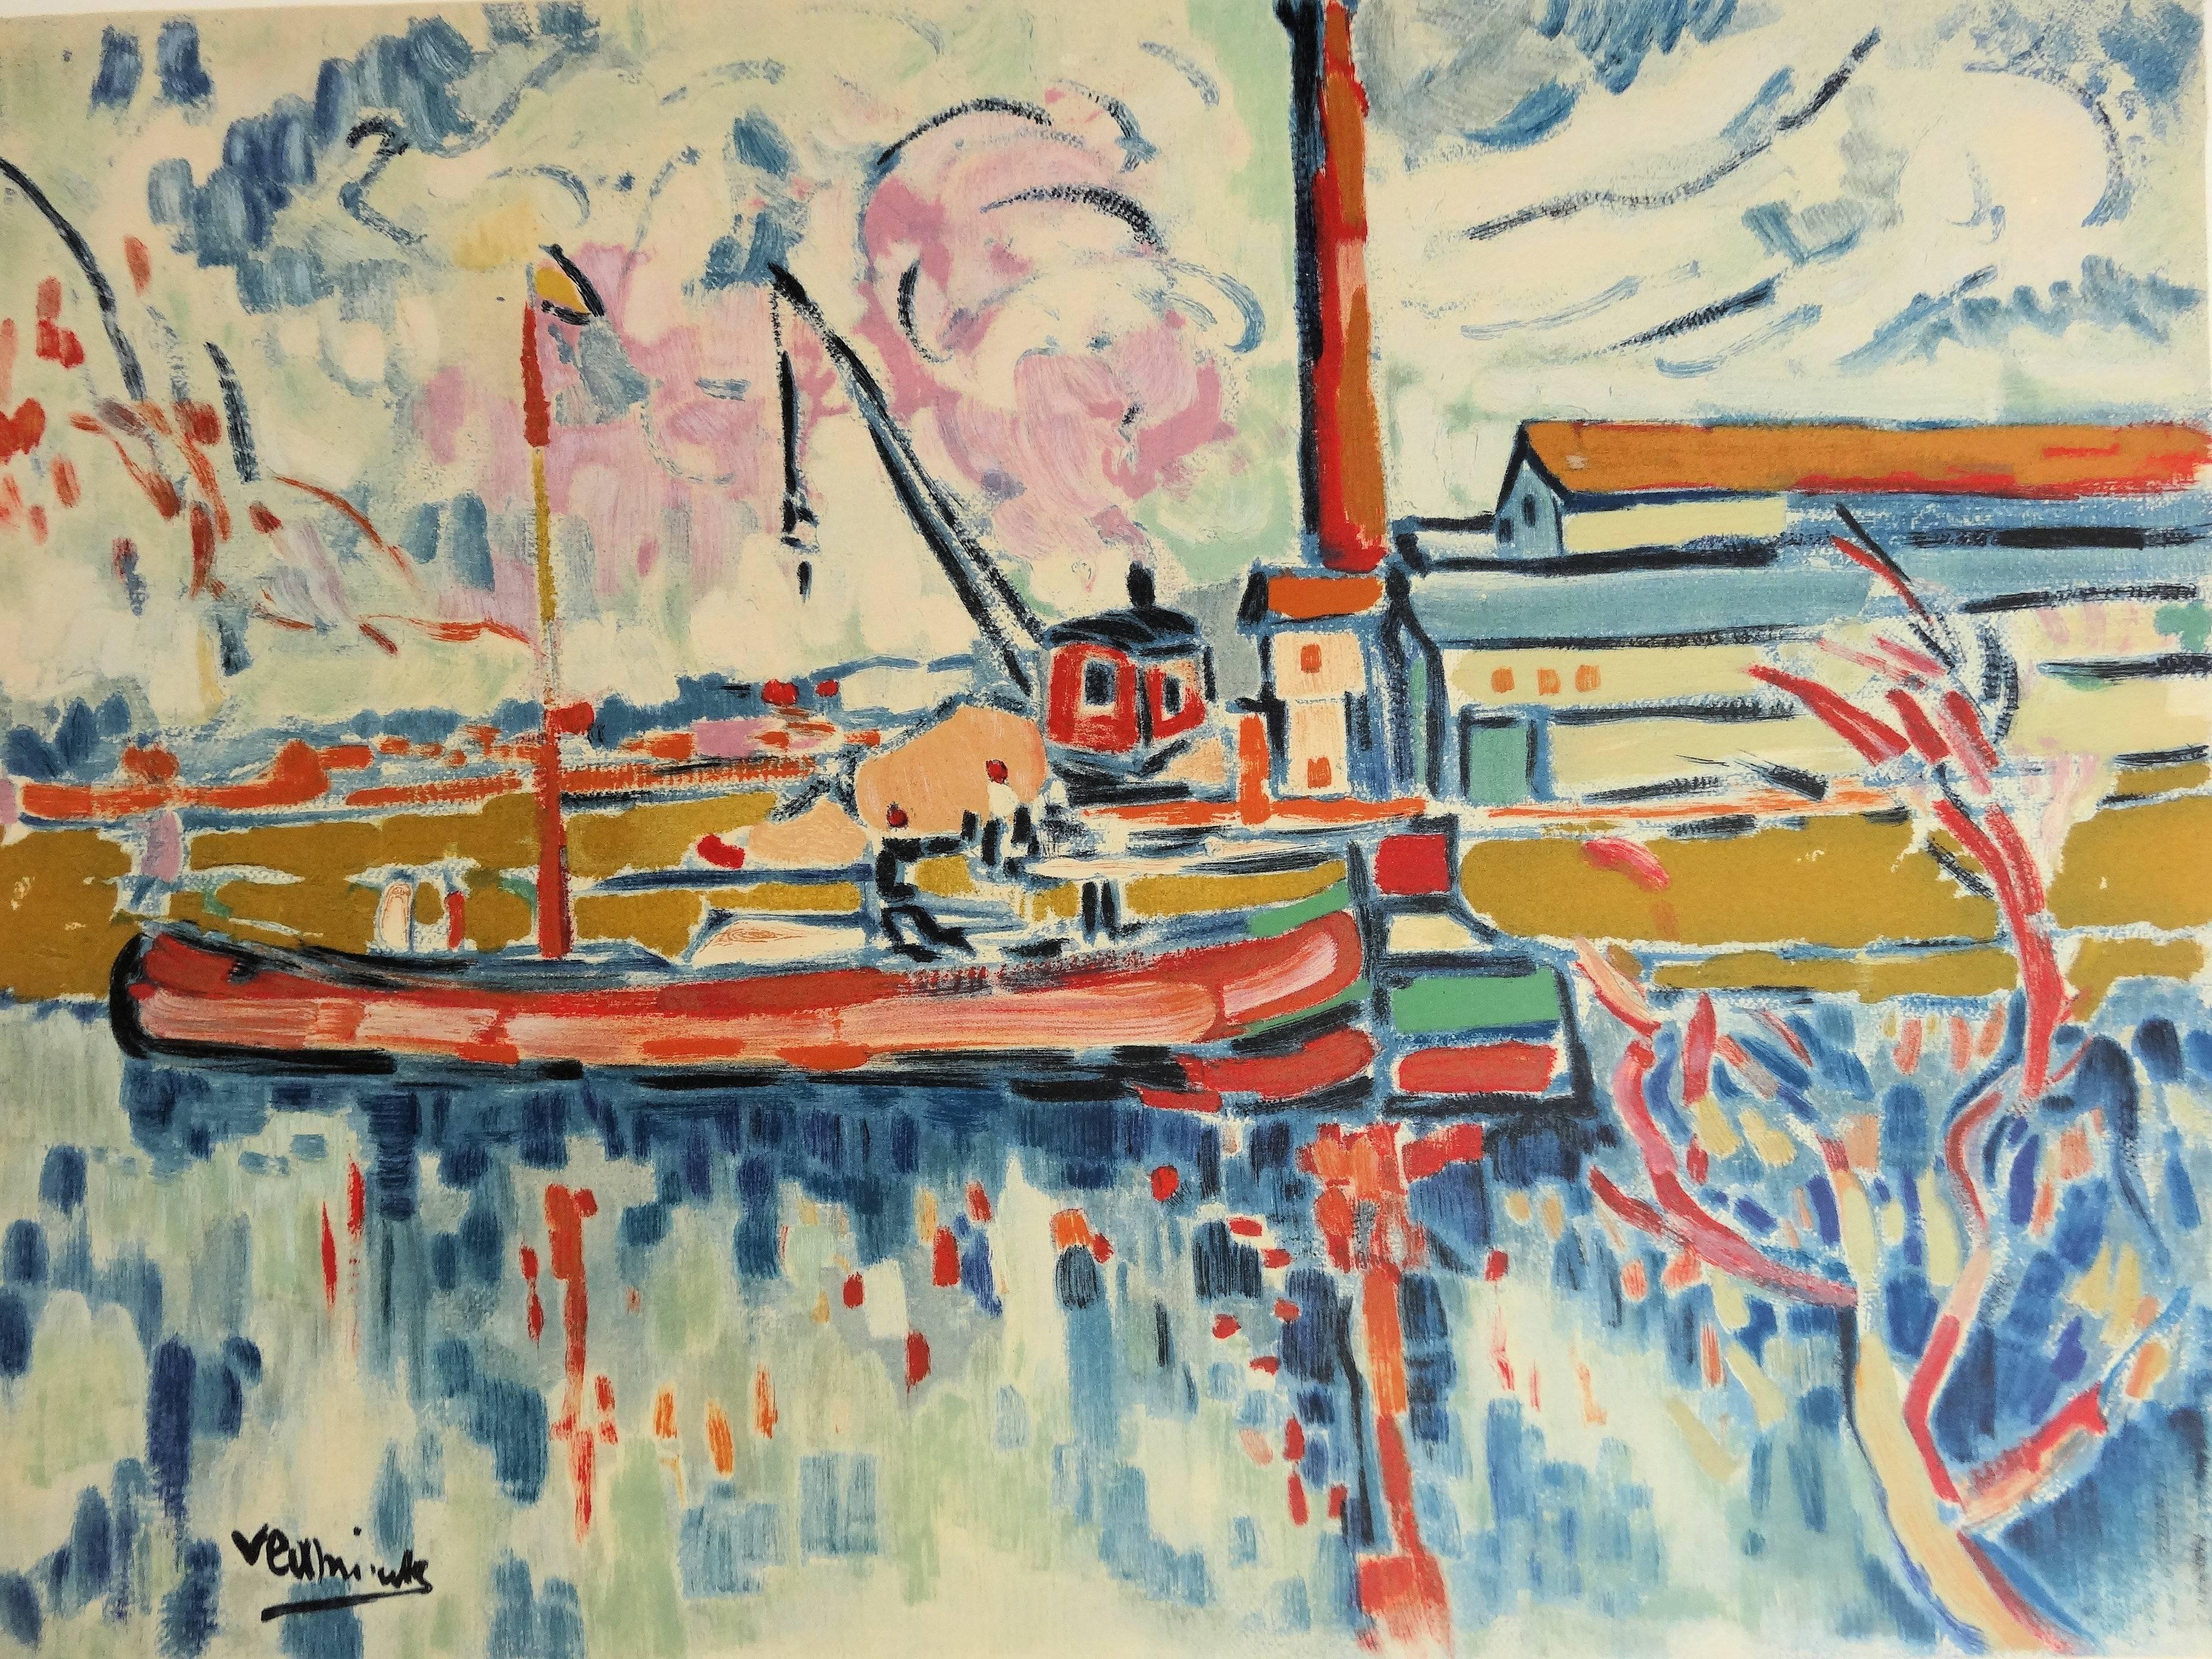 Seine River and Boat in Chatou - Lithograph, 1972 - Fauvist Print by (after) Maurice de Vlaminck